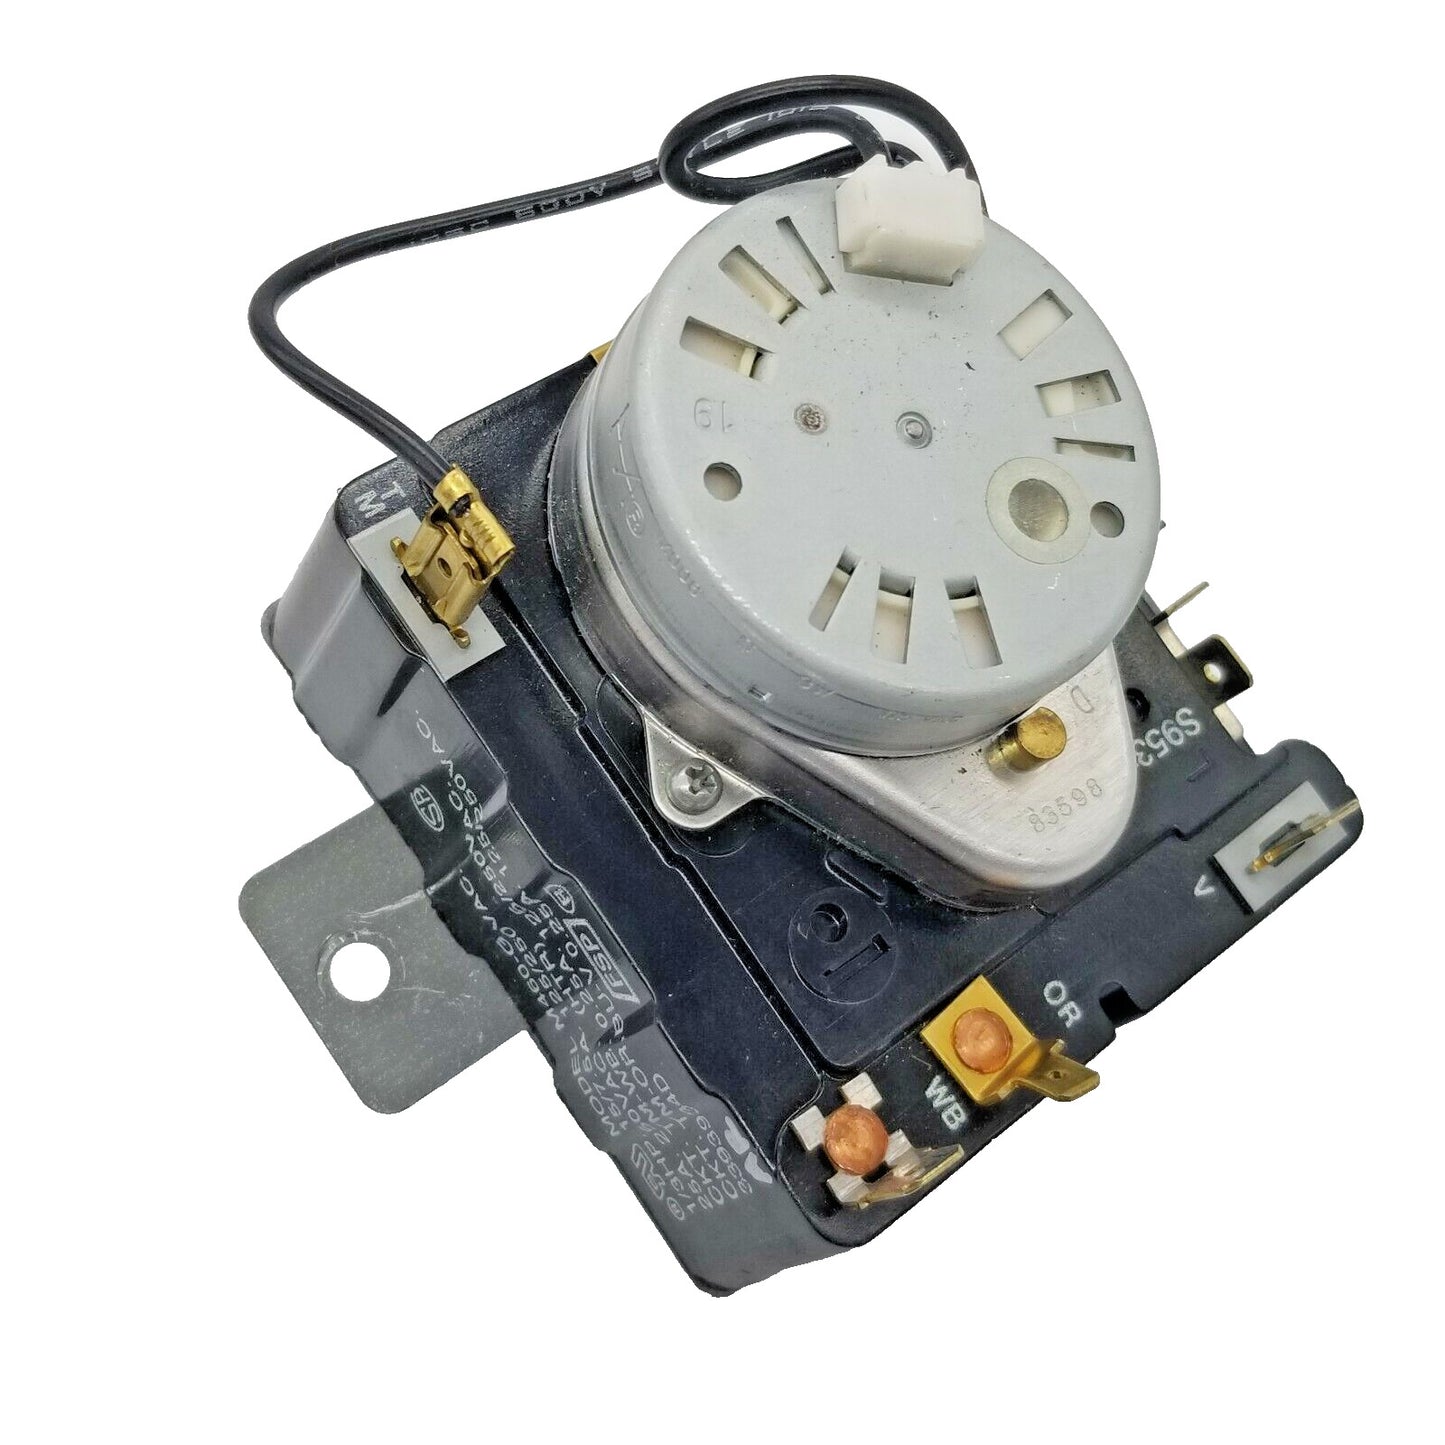 OEM Replacement for Whirlpool Dryer Timer 3393934D 3393934